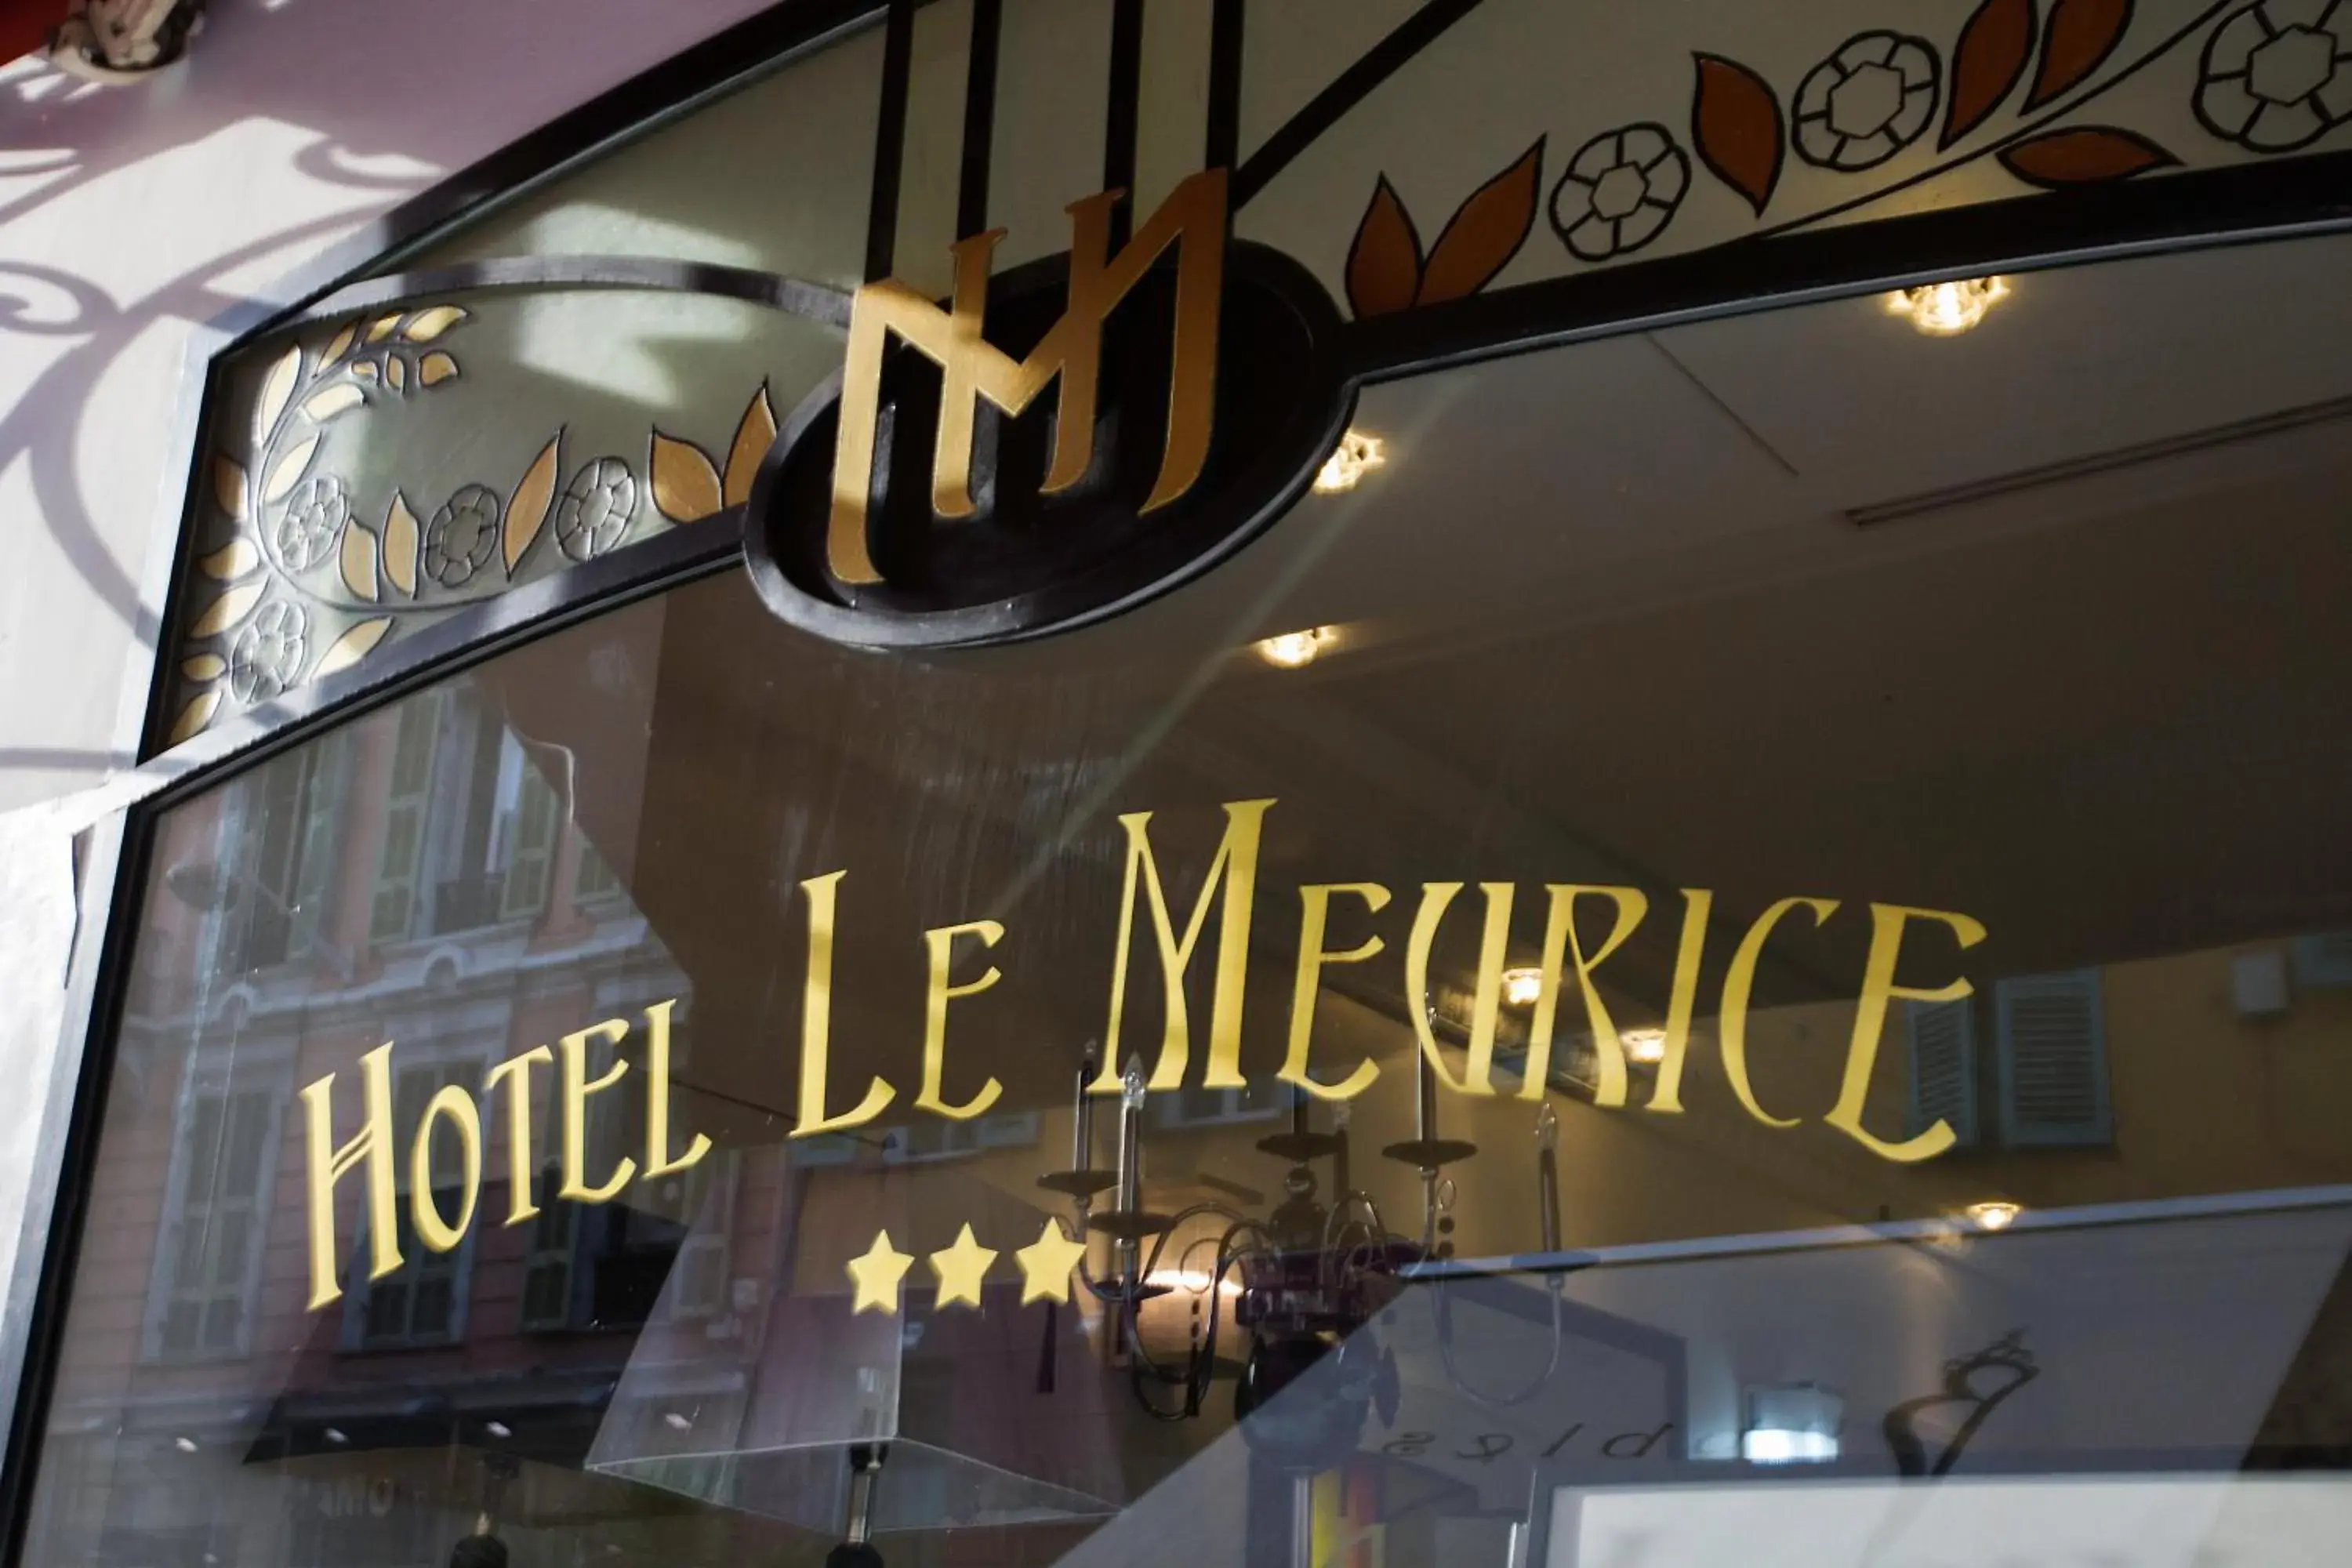 Property logo or sign in Hotel Le Meurice